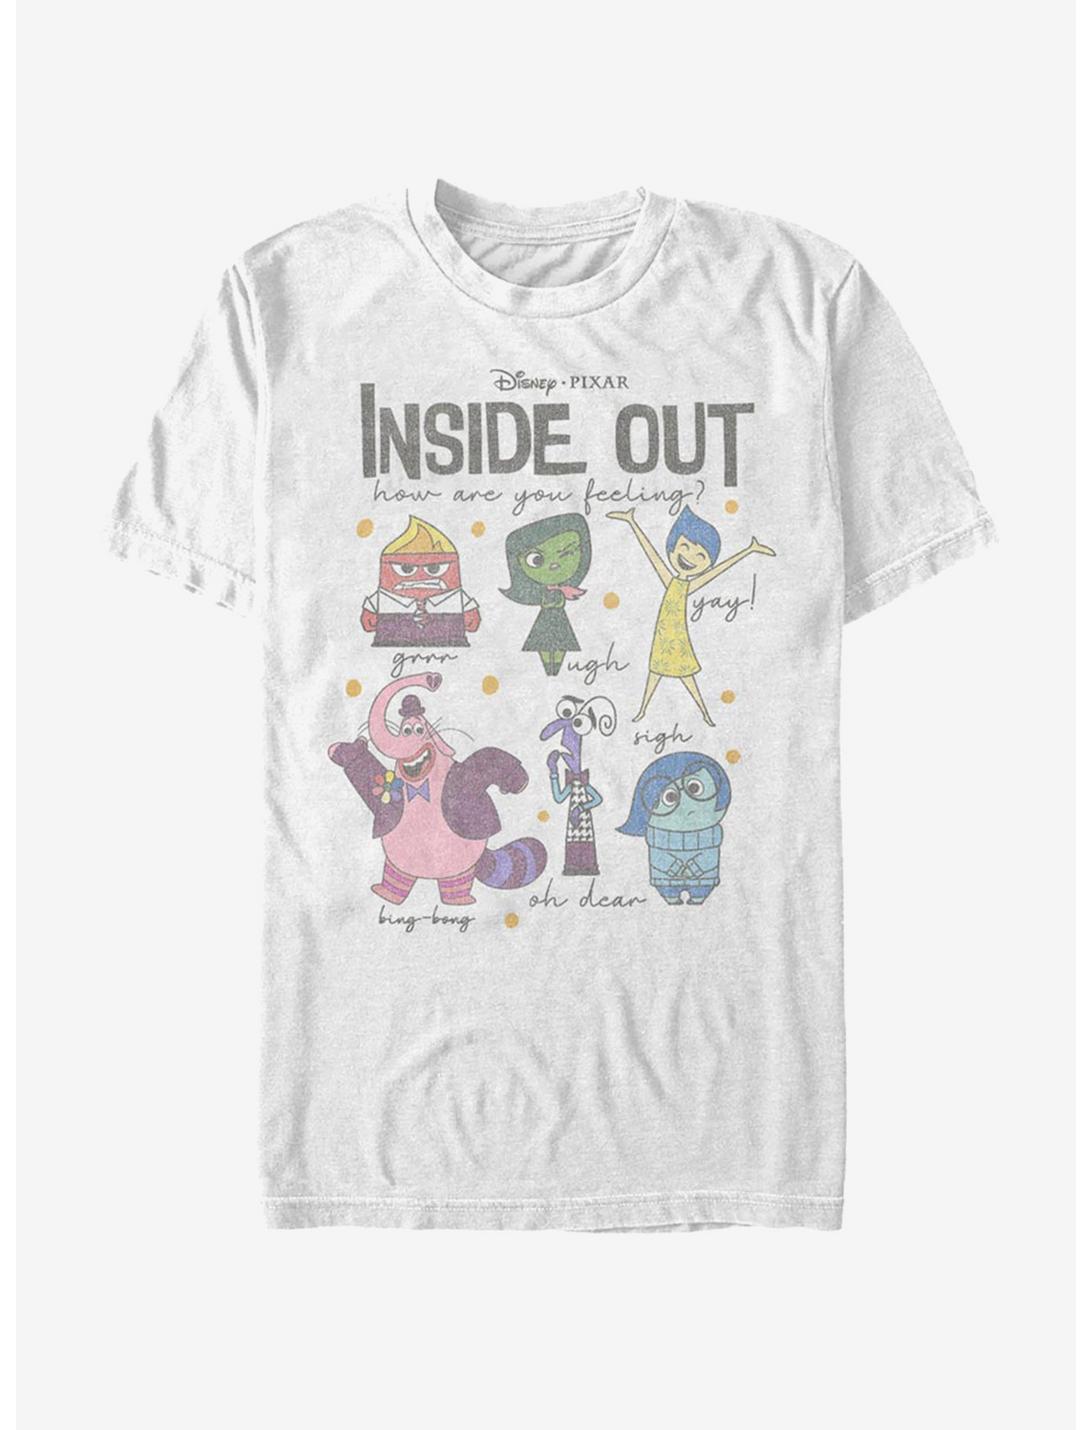 Disney Pixar Inside Out How Are You Feeling T-Shirt, WHITE, hi-res